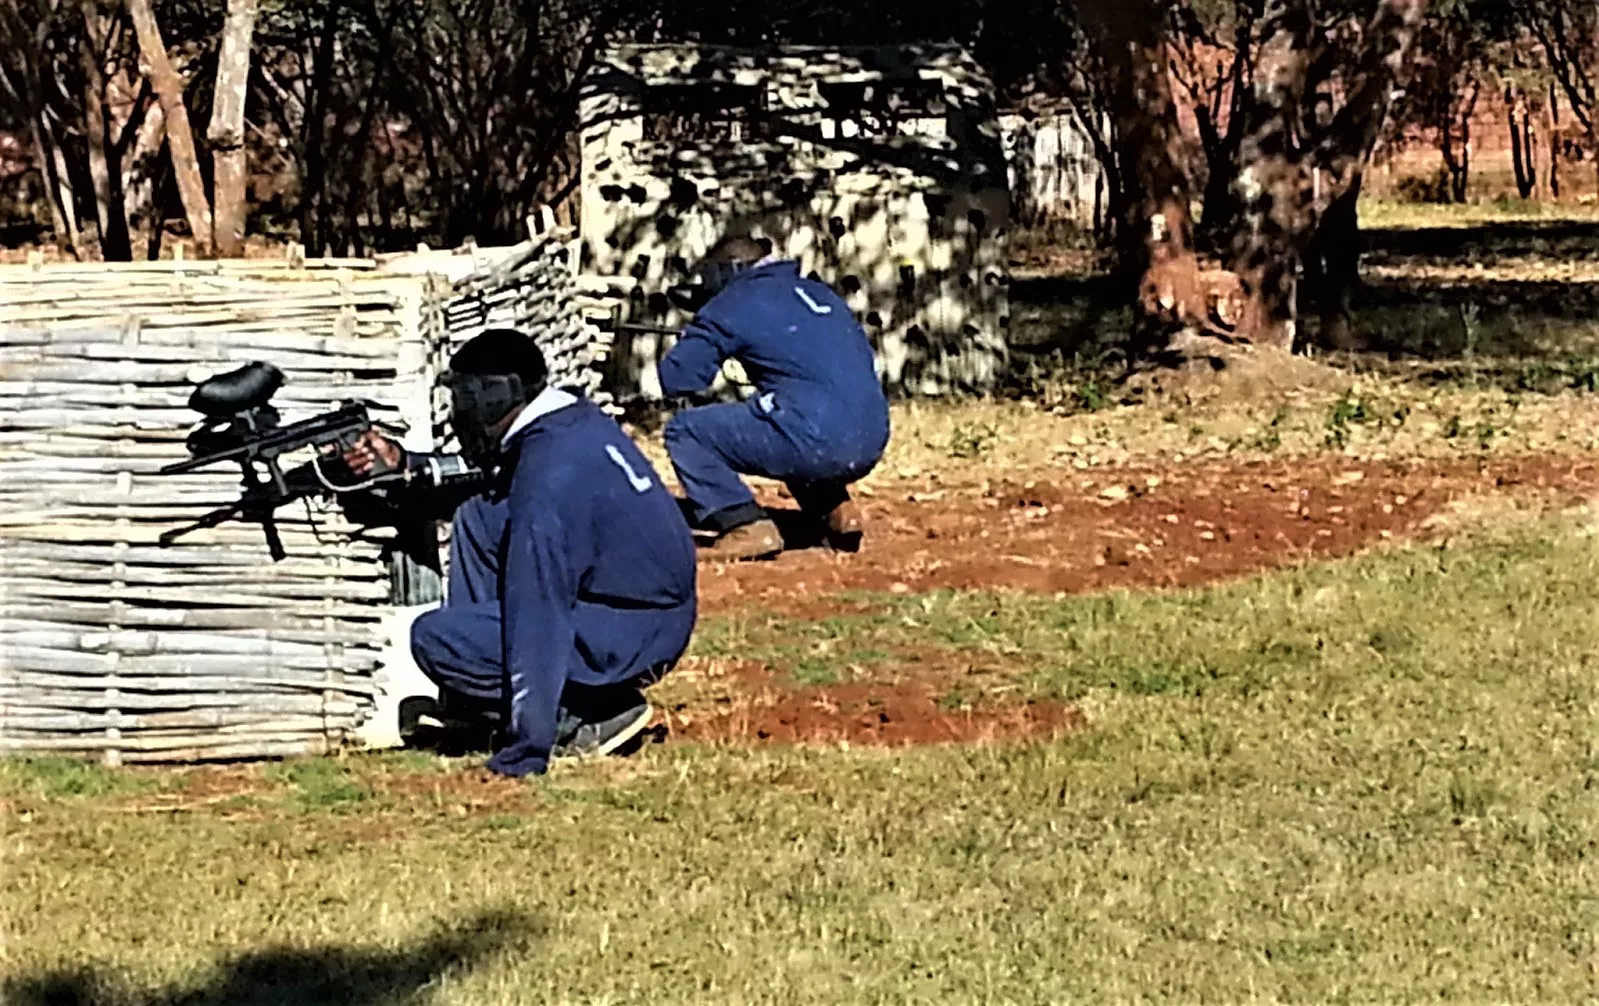 Paintball Mania in Zambia, Africa | Paintball - Rated 0.9